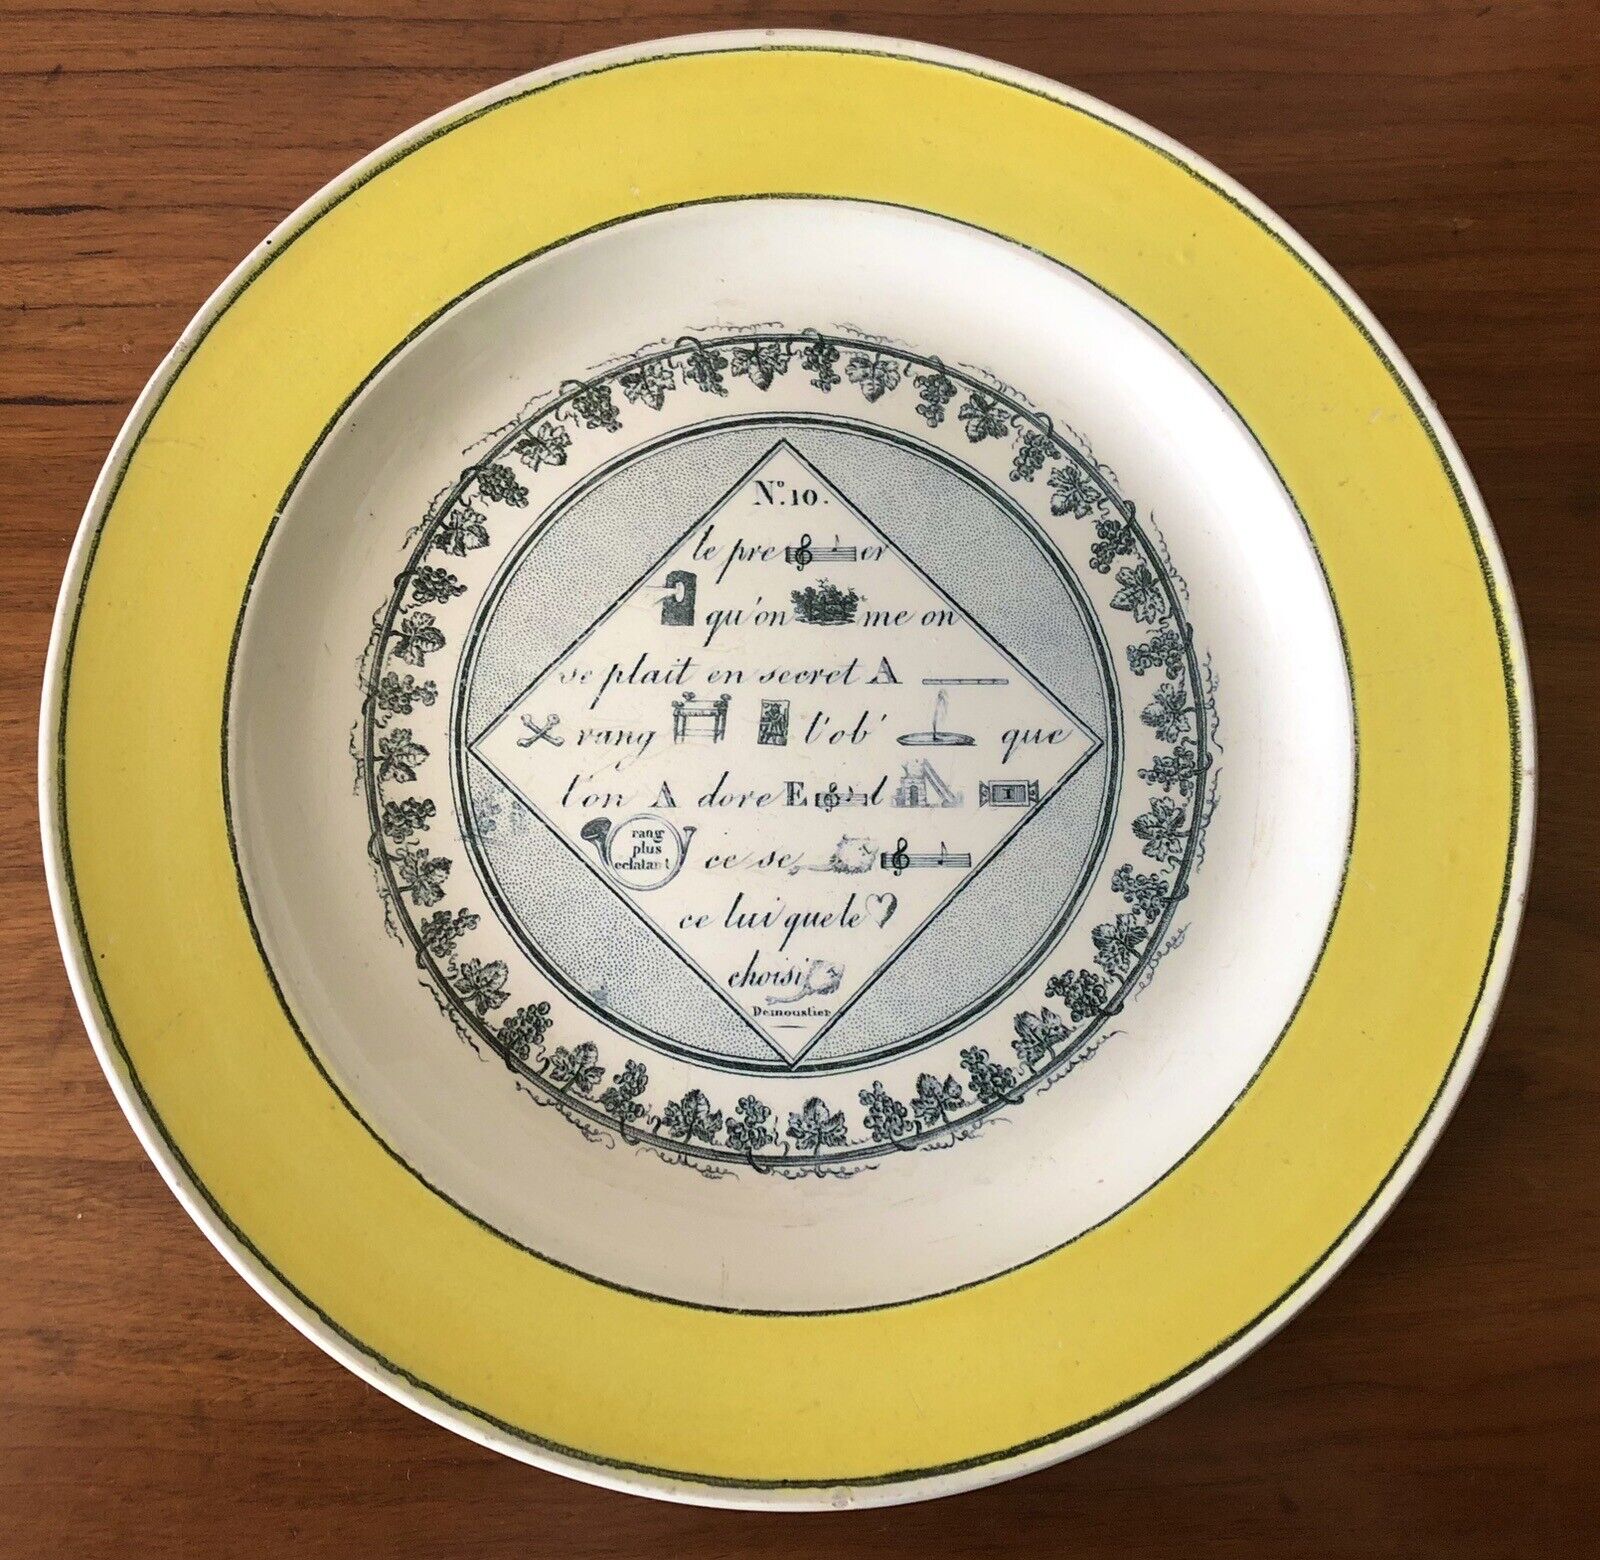 Antique c1830 French Creil Montereau Rebus Riddle Plate #10 Canary Yellow Border